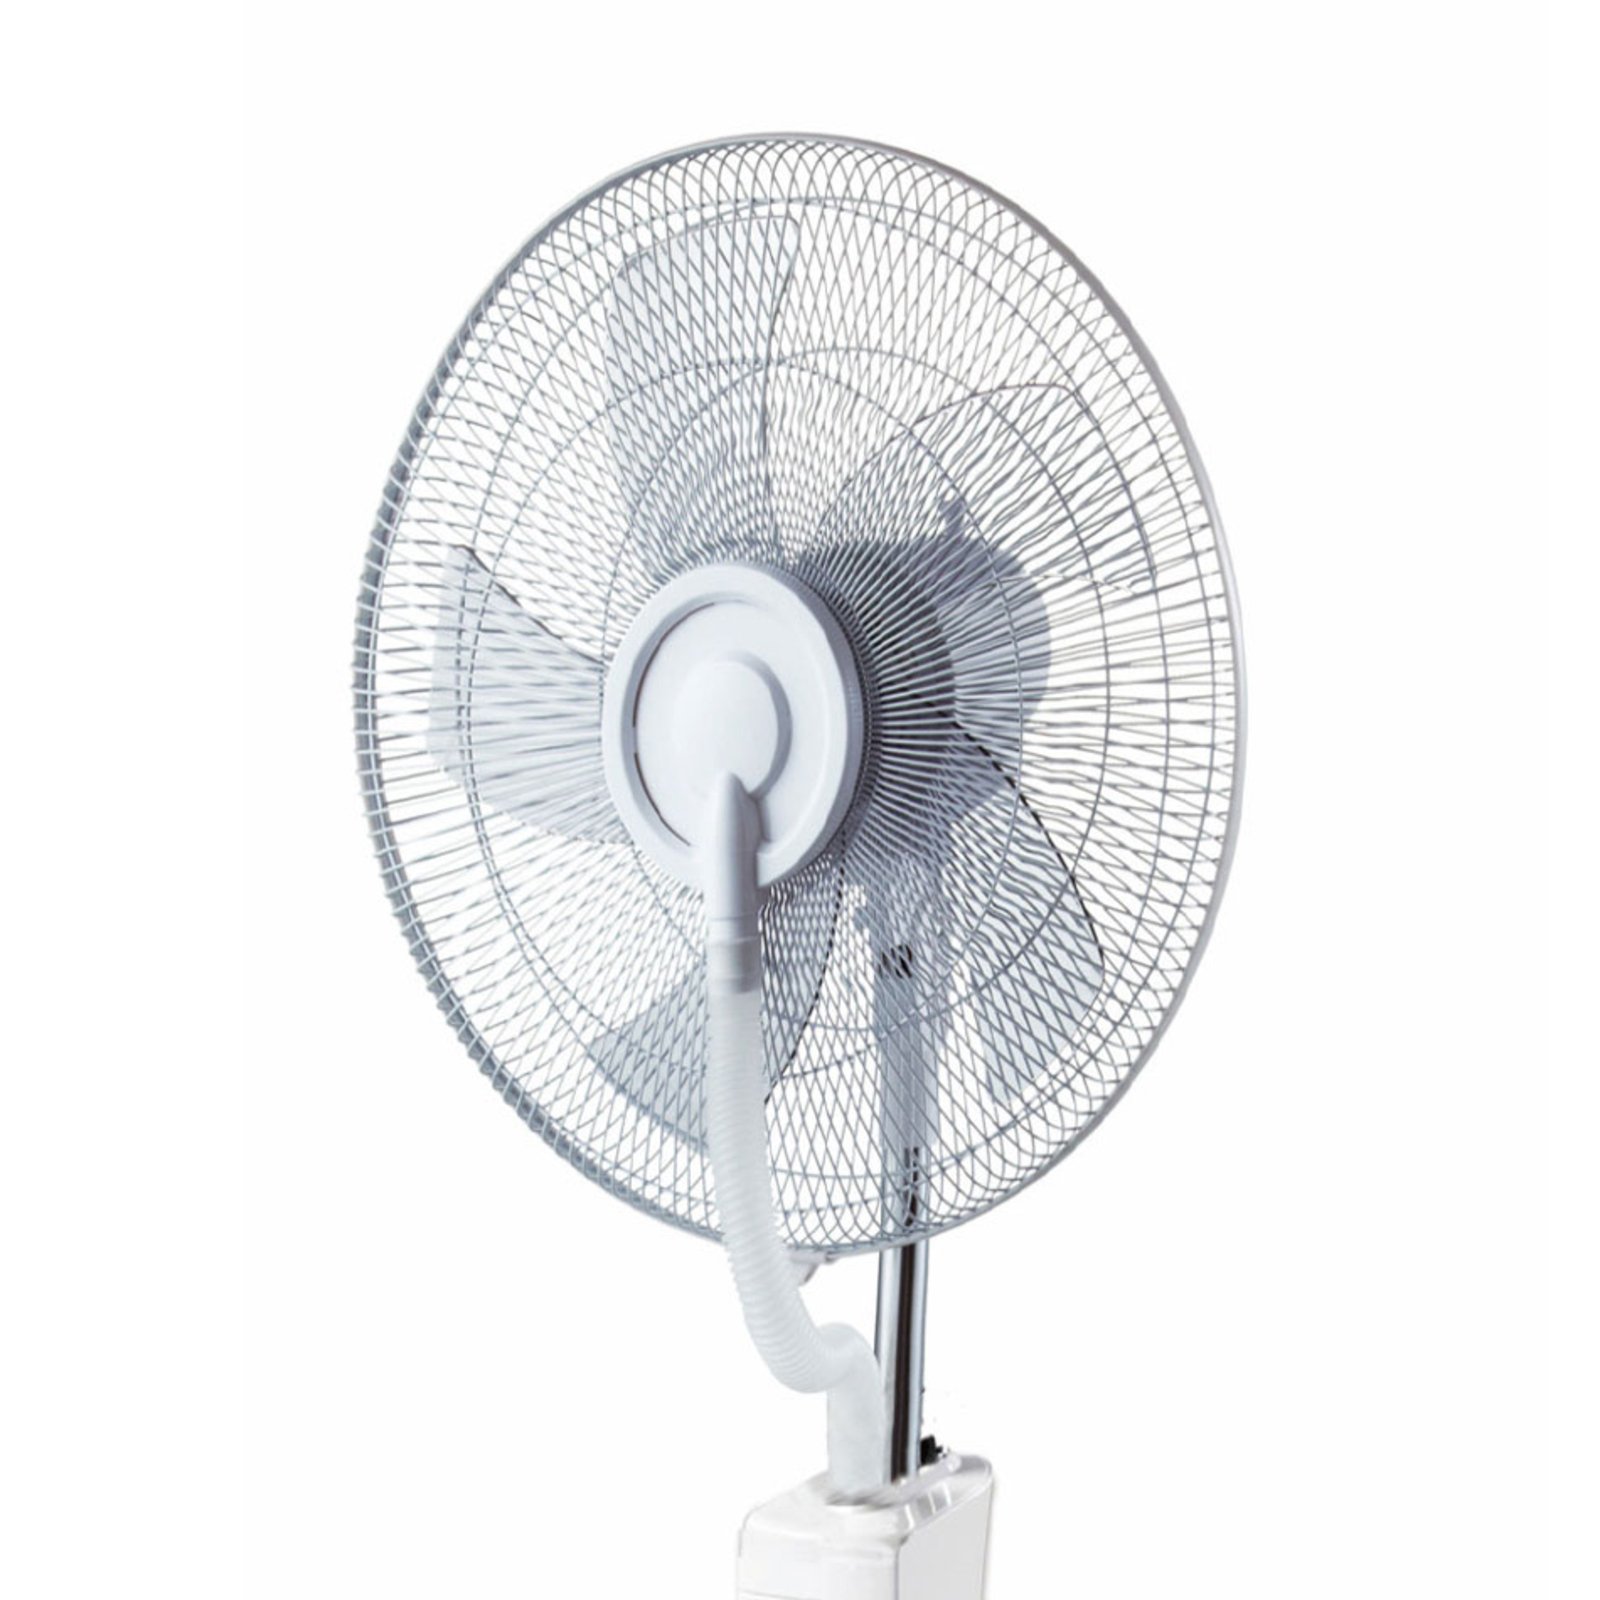 Coolio pedestal fan with humidifier